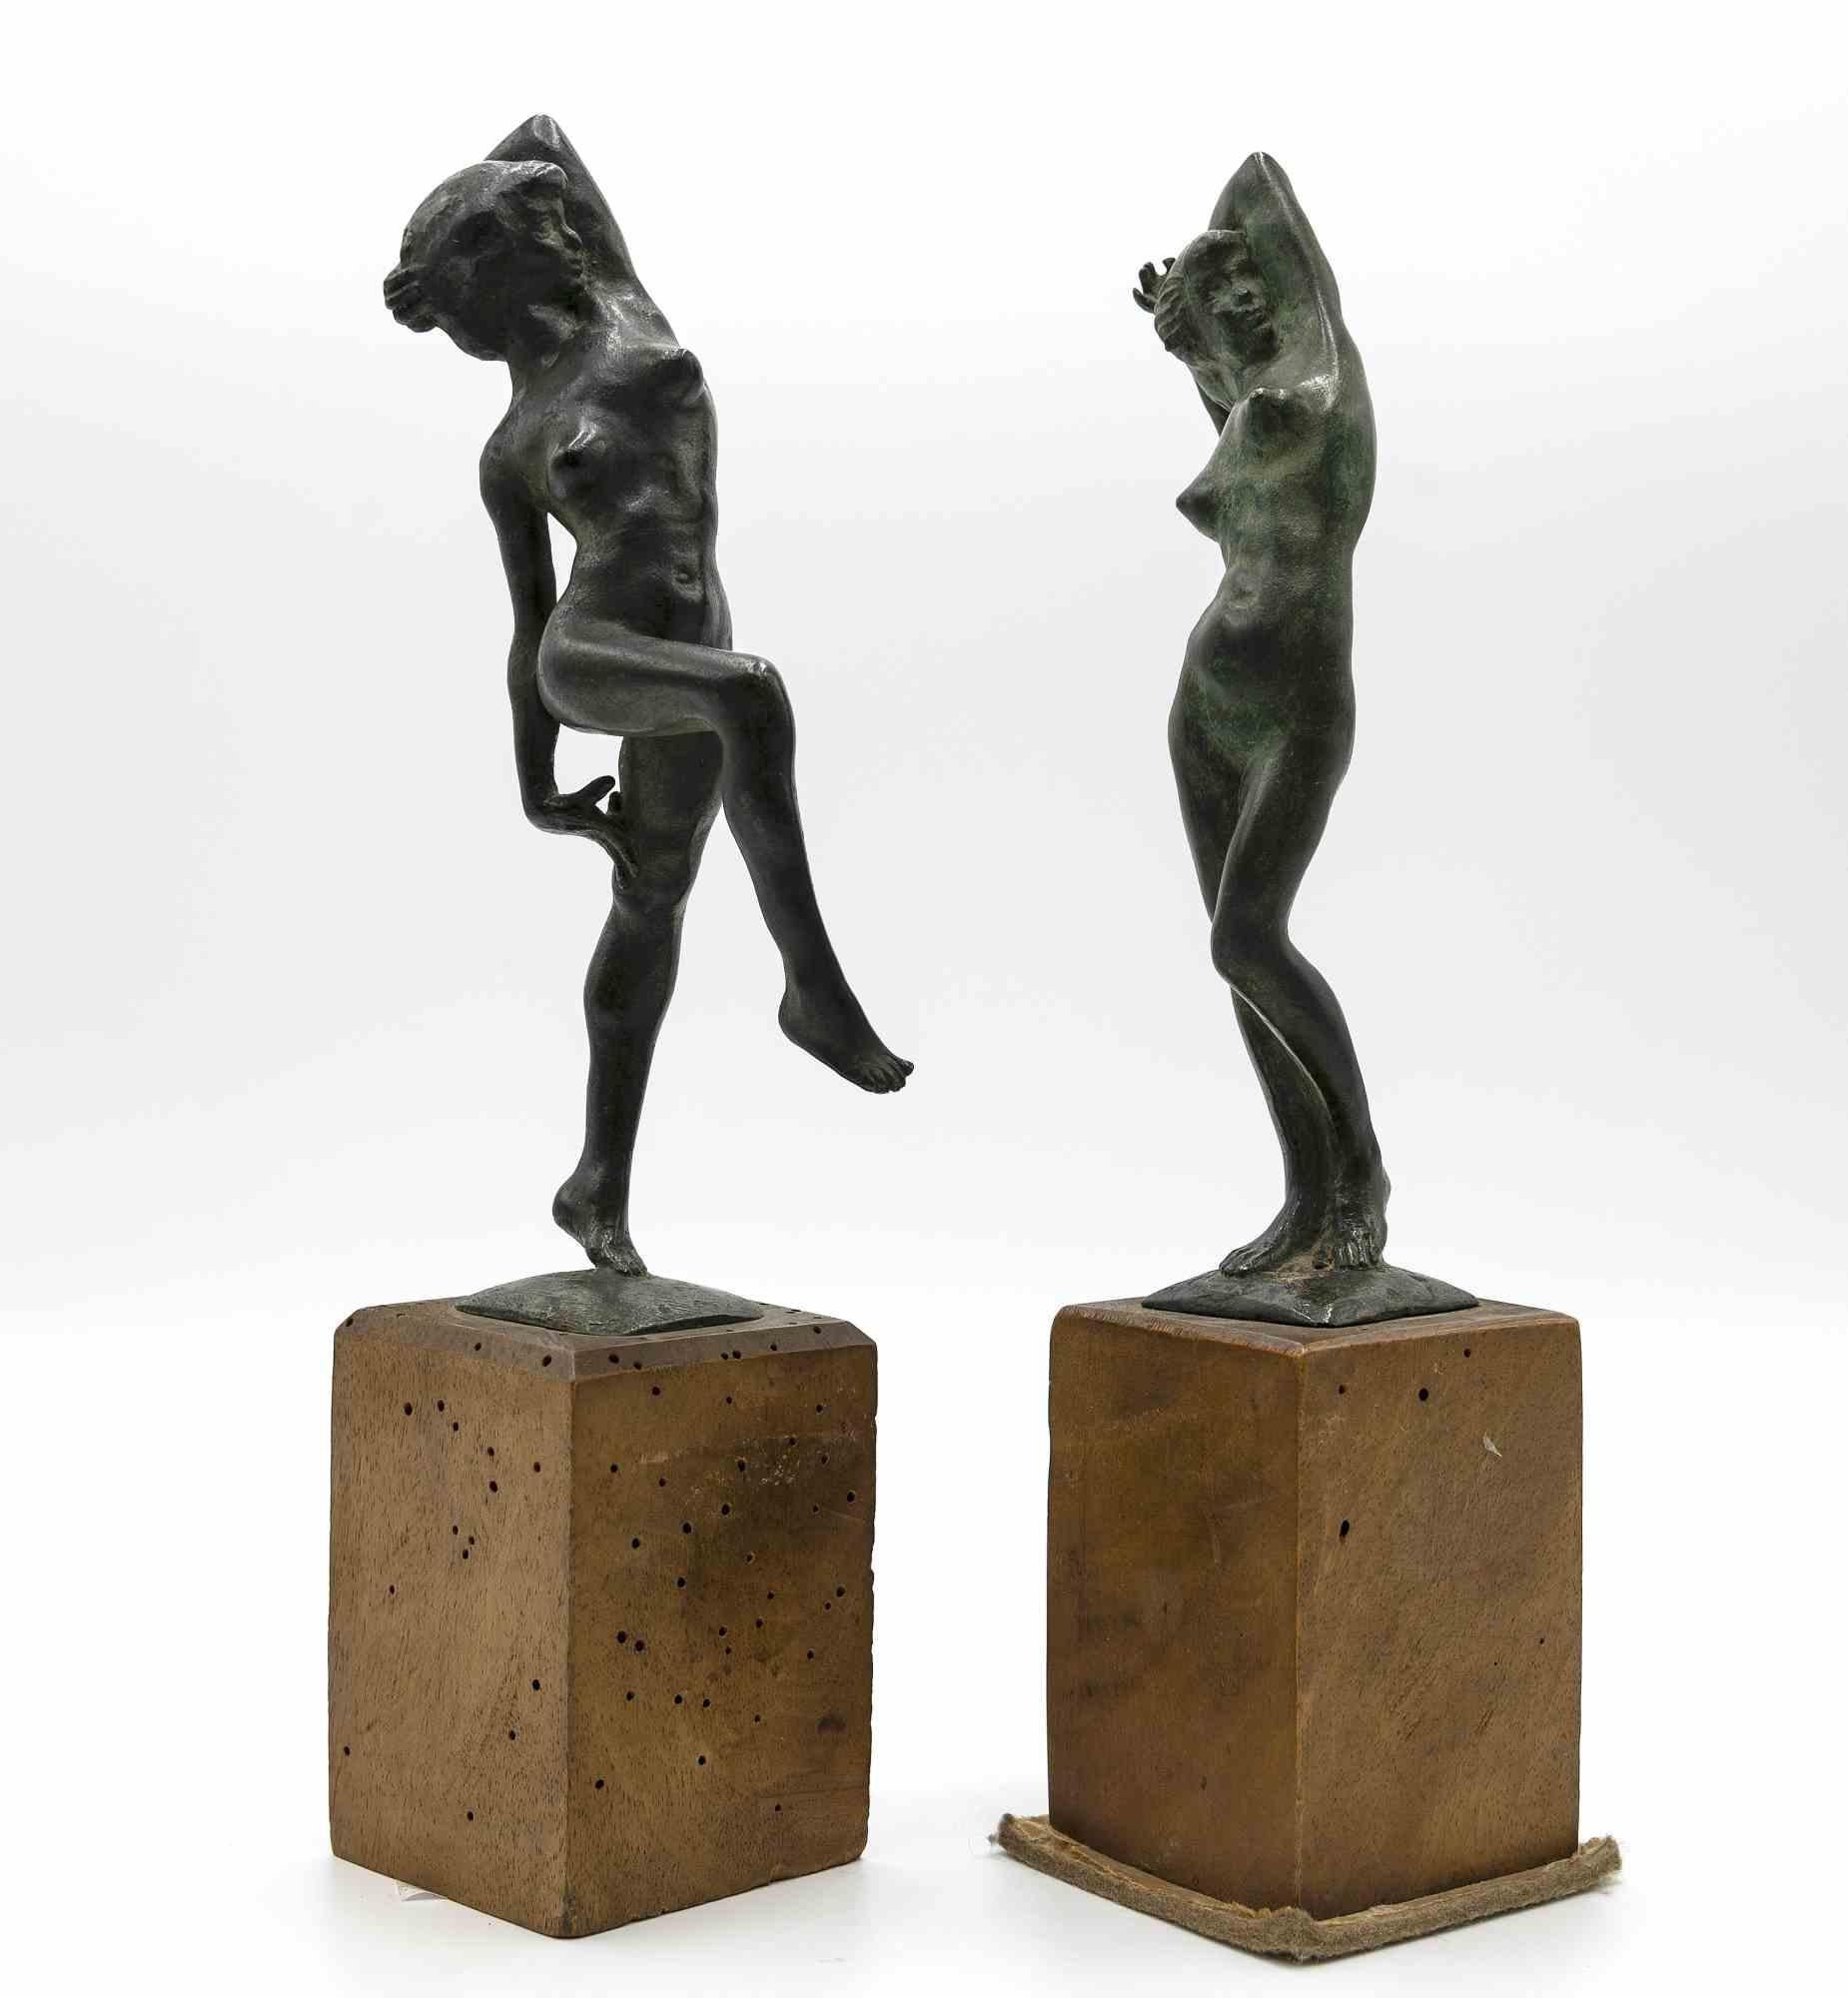 Bronze sculpture with green glaze and wooden base by the Italian sculpture Attilio Torresini (1884-1961).

Early 20th century.

Signed on rear: A. Torresini.

A pair of bronze sculpture of two nude girls.

Wooden base.